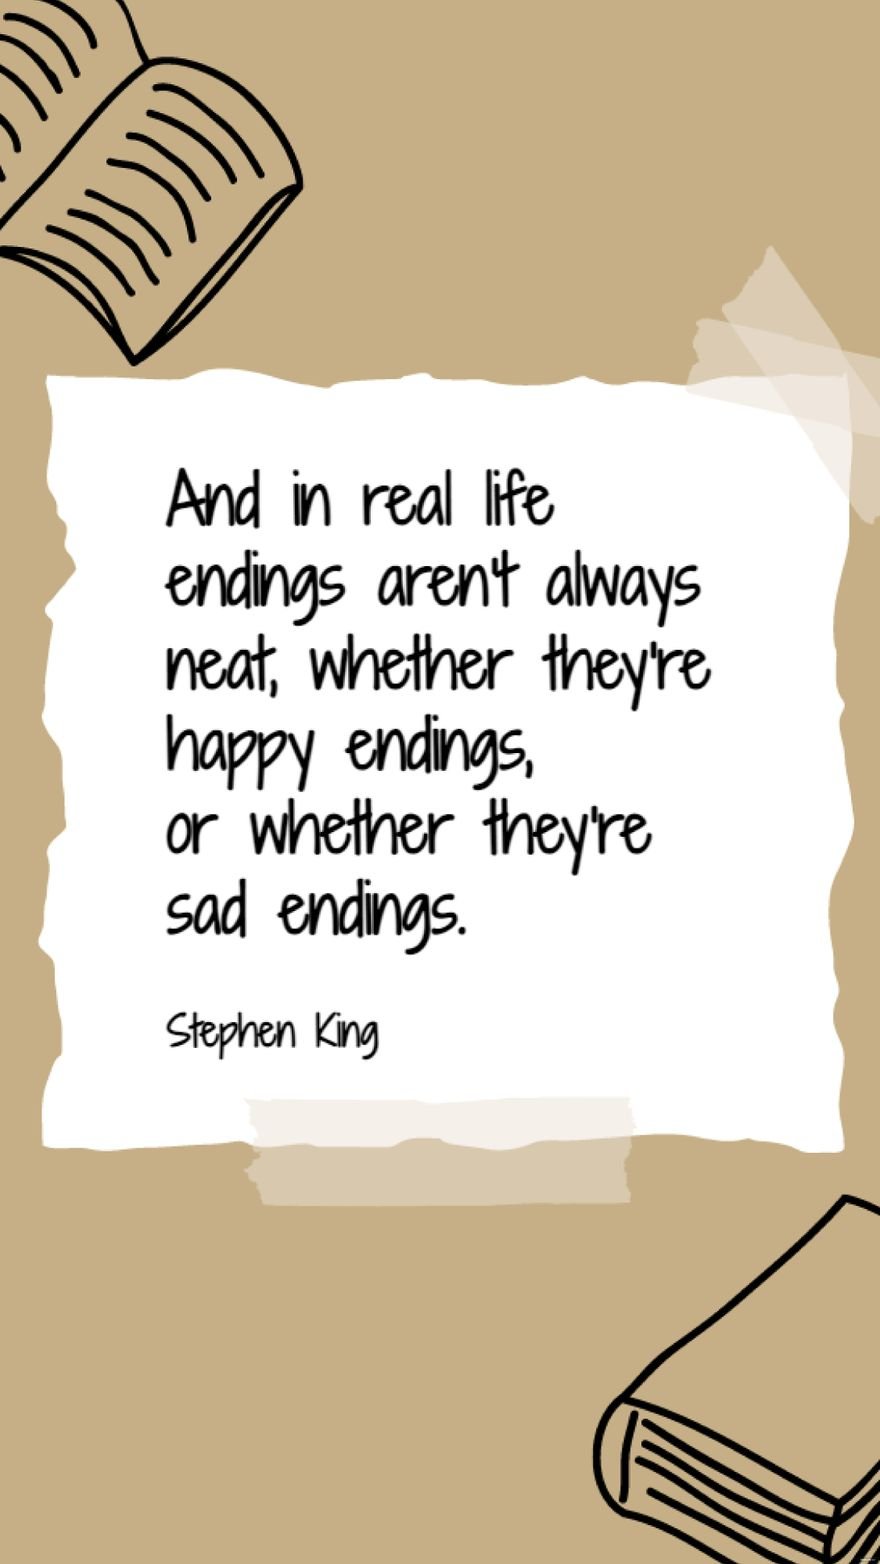 Stephen King - And in real life endings aren't always neat, whether they're happy endings, or whether they're sad endings.